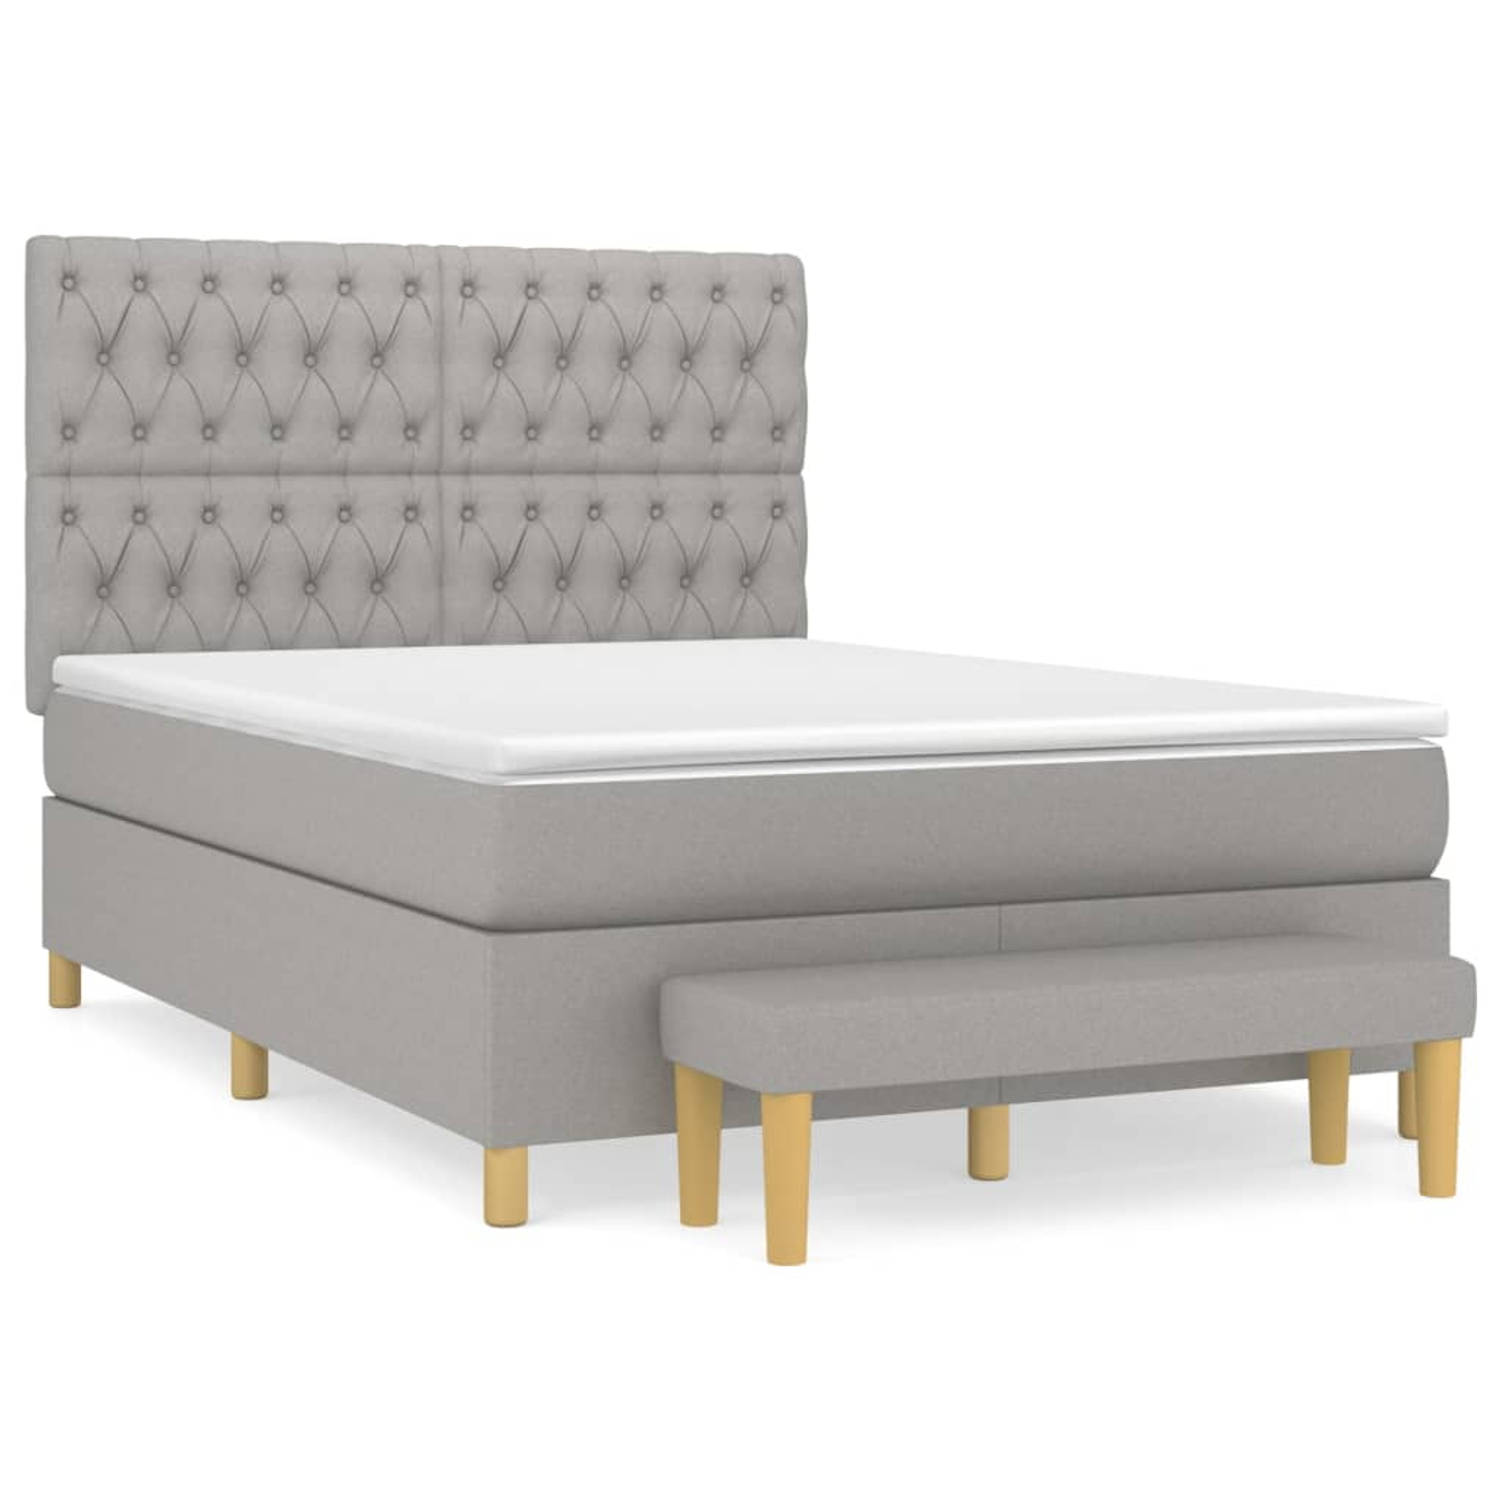 The Living Store Boxspringbed - Exclusief - Bed en Bank - 193 x 144 x 118/128 cm - Lichtgrijs